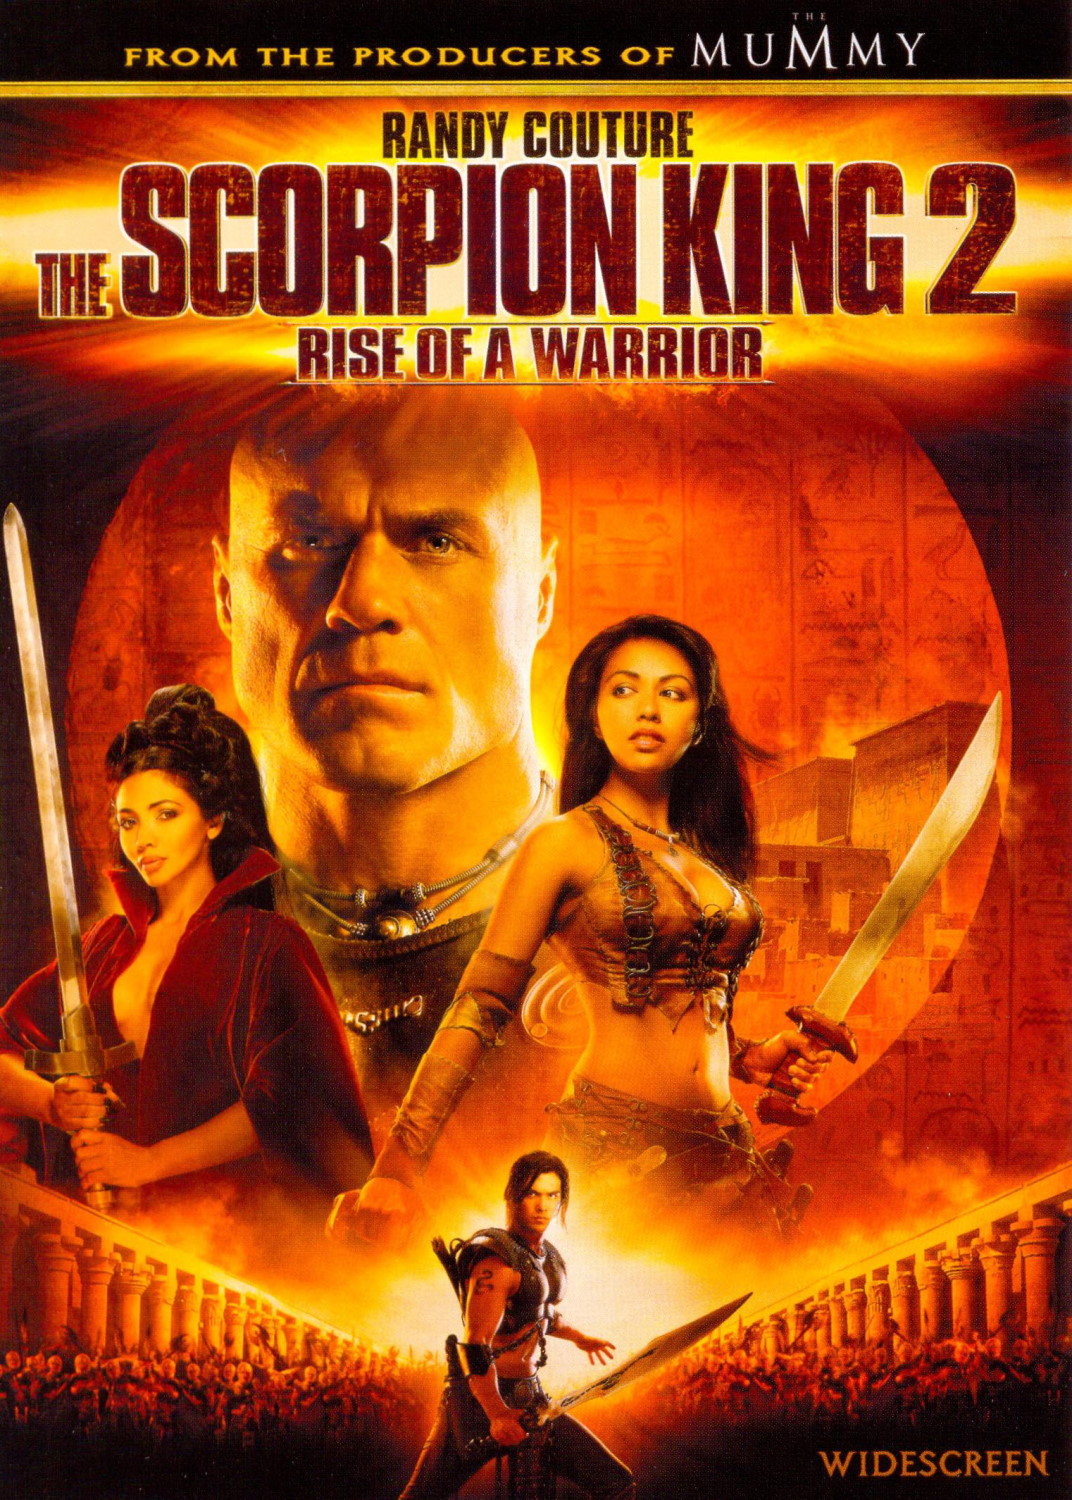 The Scorpion King 2: Rise of a Warrior (2008) Poster